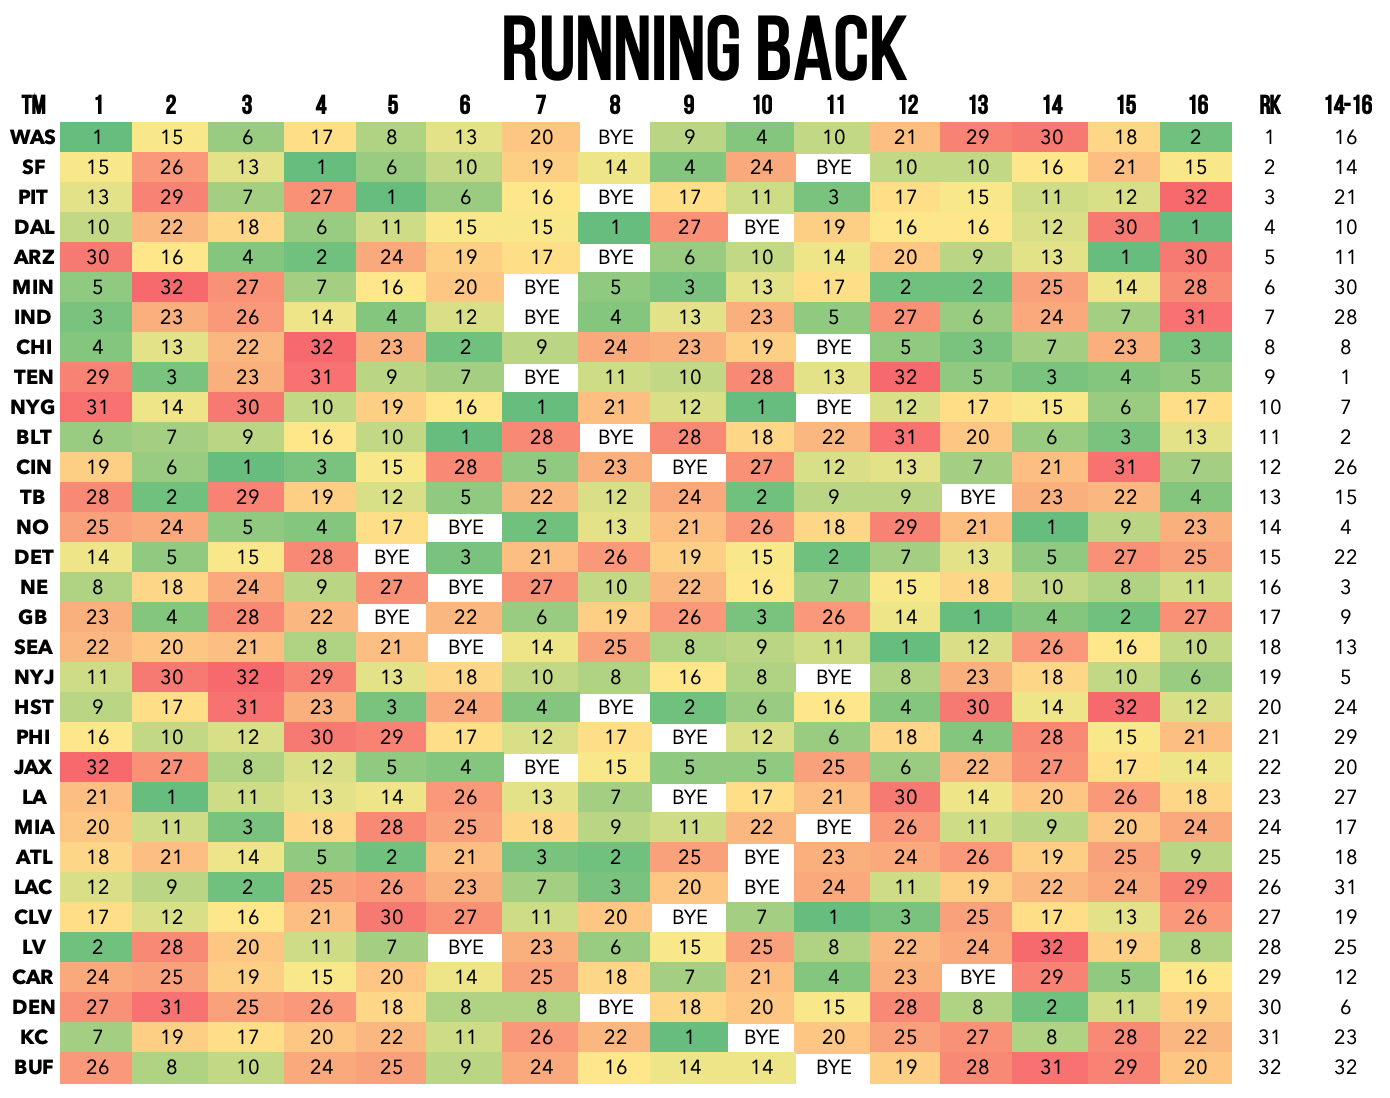 Best and worst running back strength of schedule for 2020 fantasy